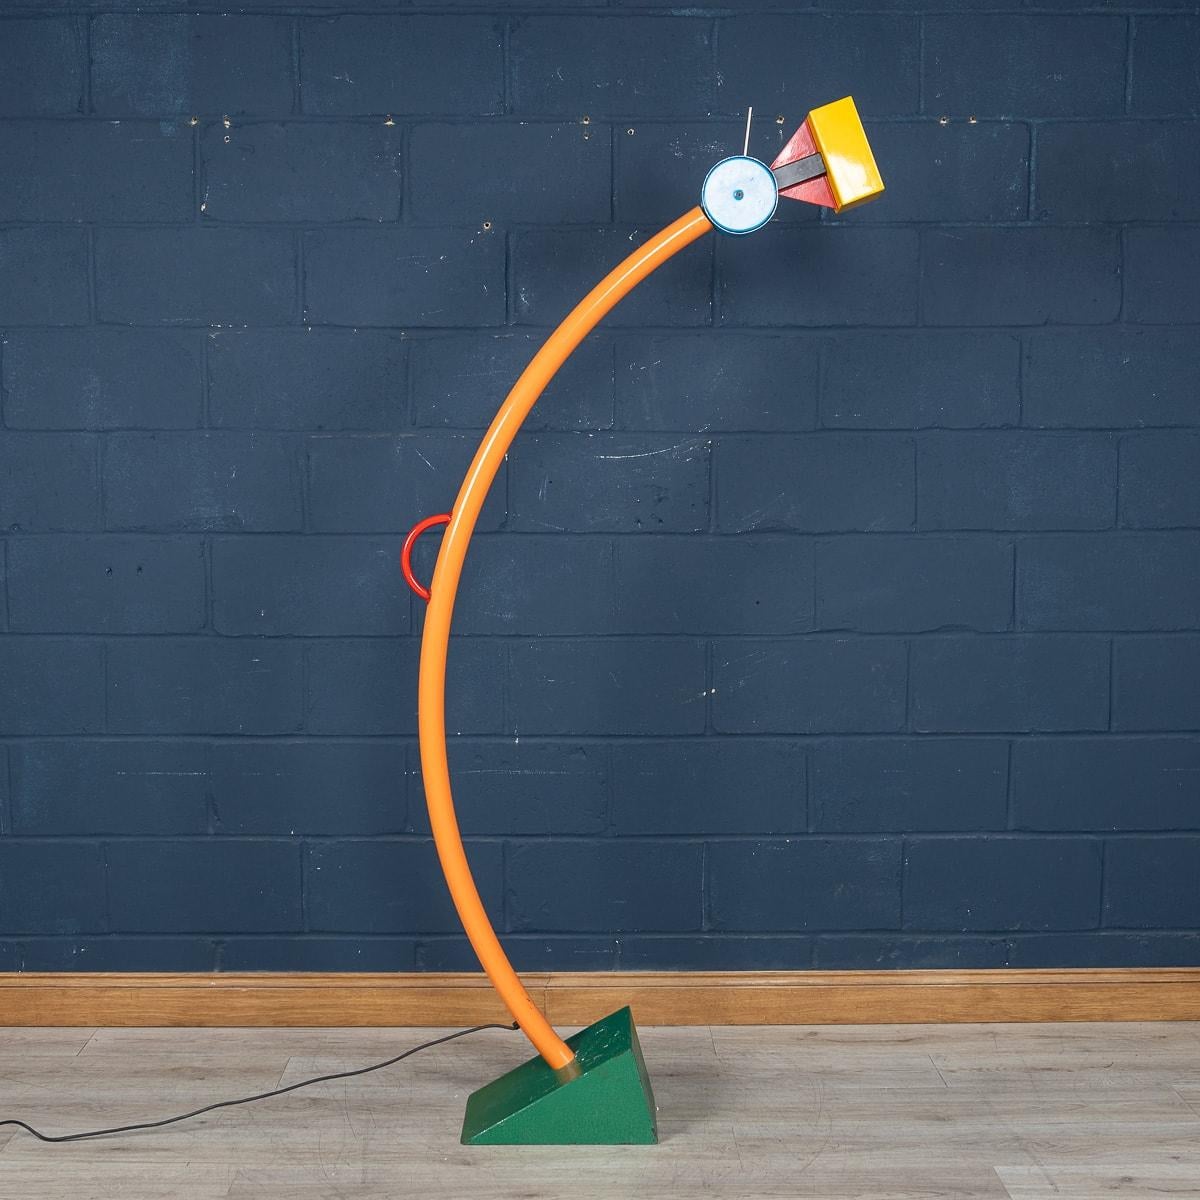 Originally designed by Ettore Sottsass for his company Memphis Milano in 1981, the Treetops floor lamp has since become an icon of the Memphis design movement. Constructed from painted metal, the lamp perfectly balances irony and charm to create a